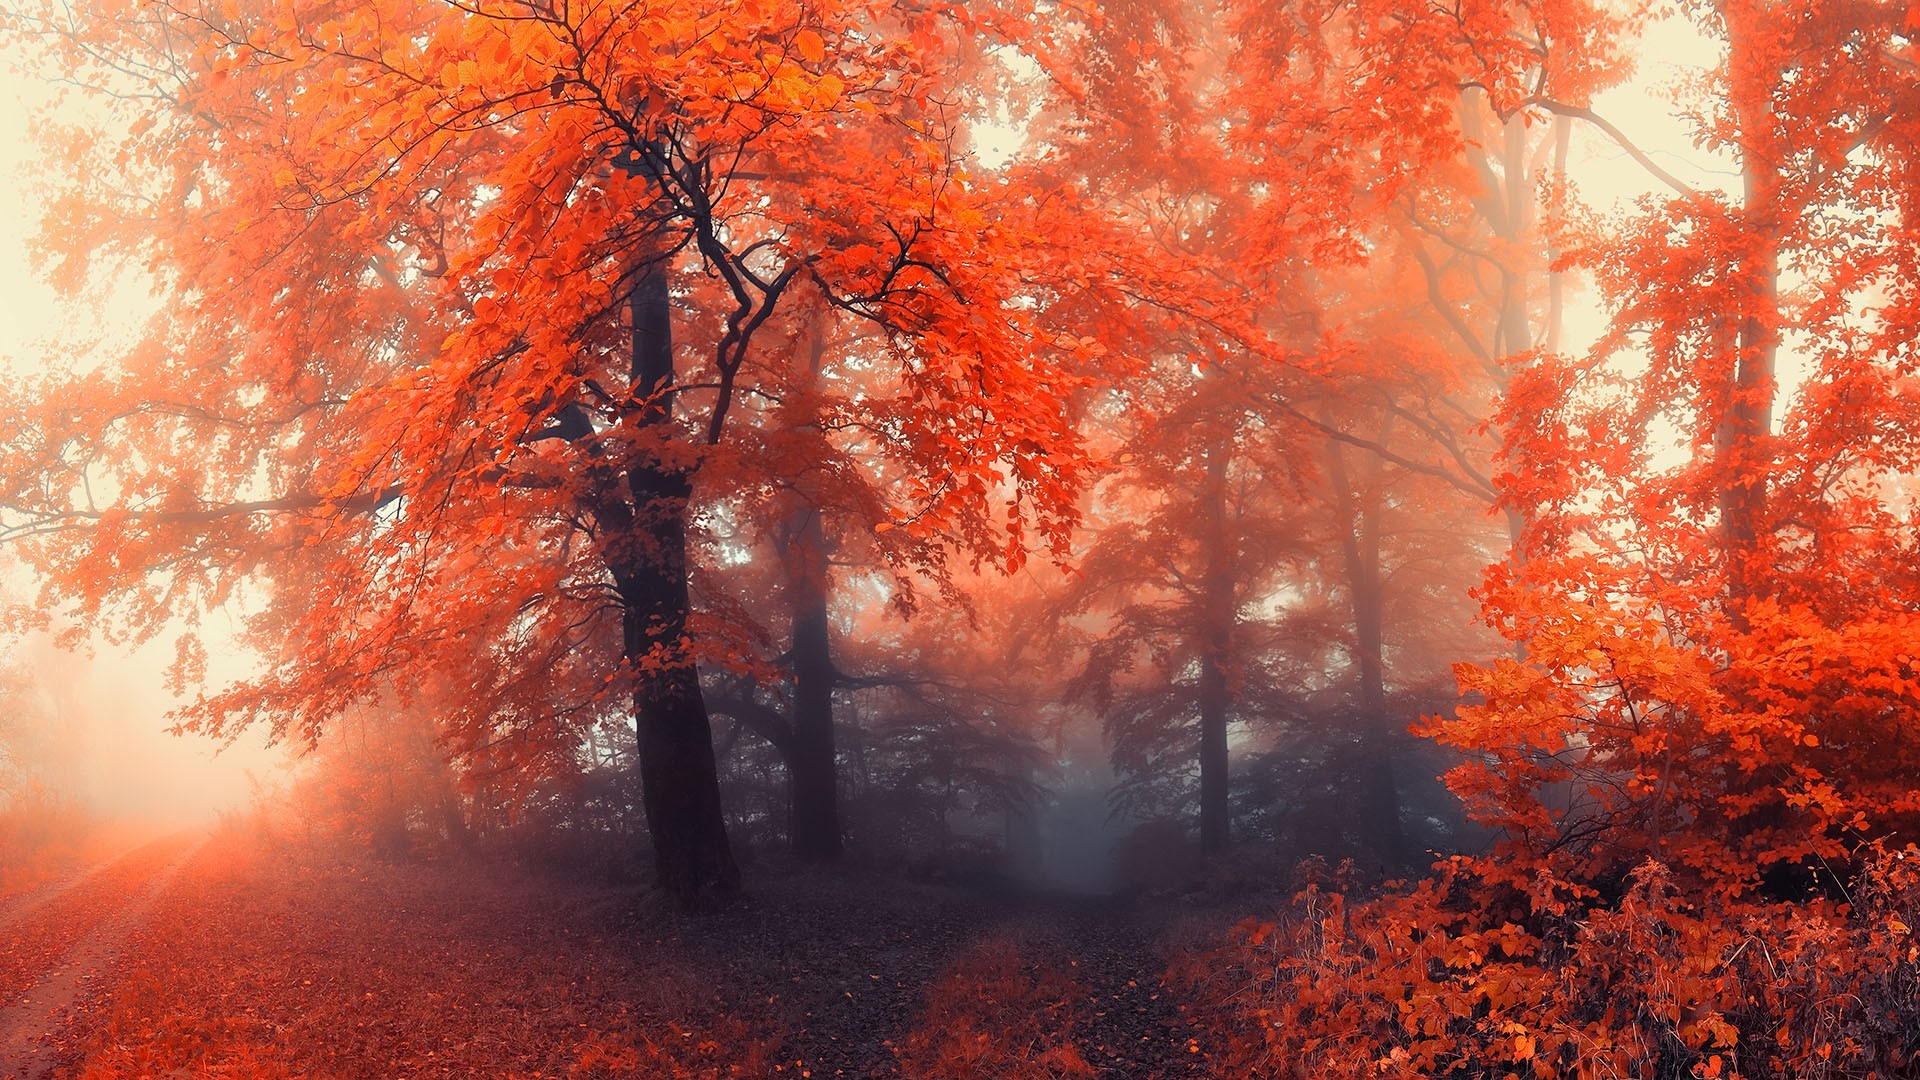 General 1920x1080 forest nature mist fall plants colorful outdoors trees